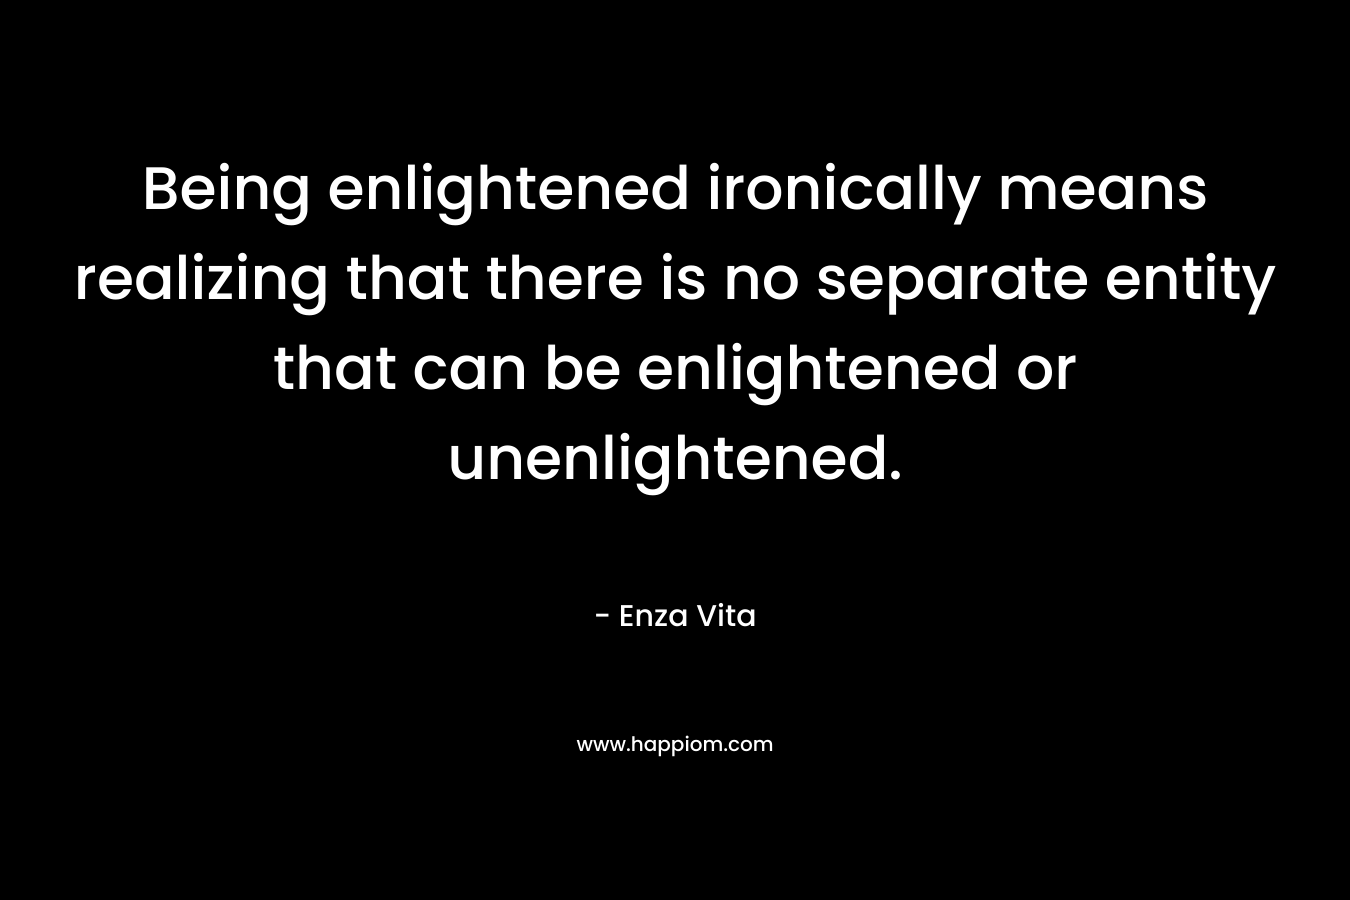 Being enlightened ironically means realizing that there is no separate entity that can be enlightened or unenlightened.